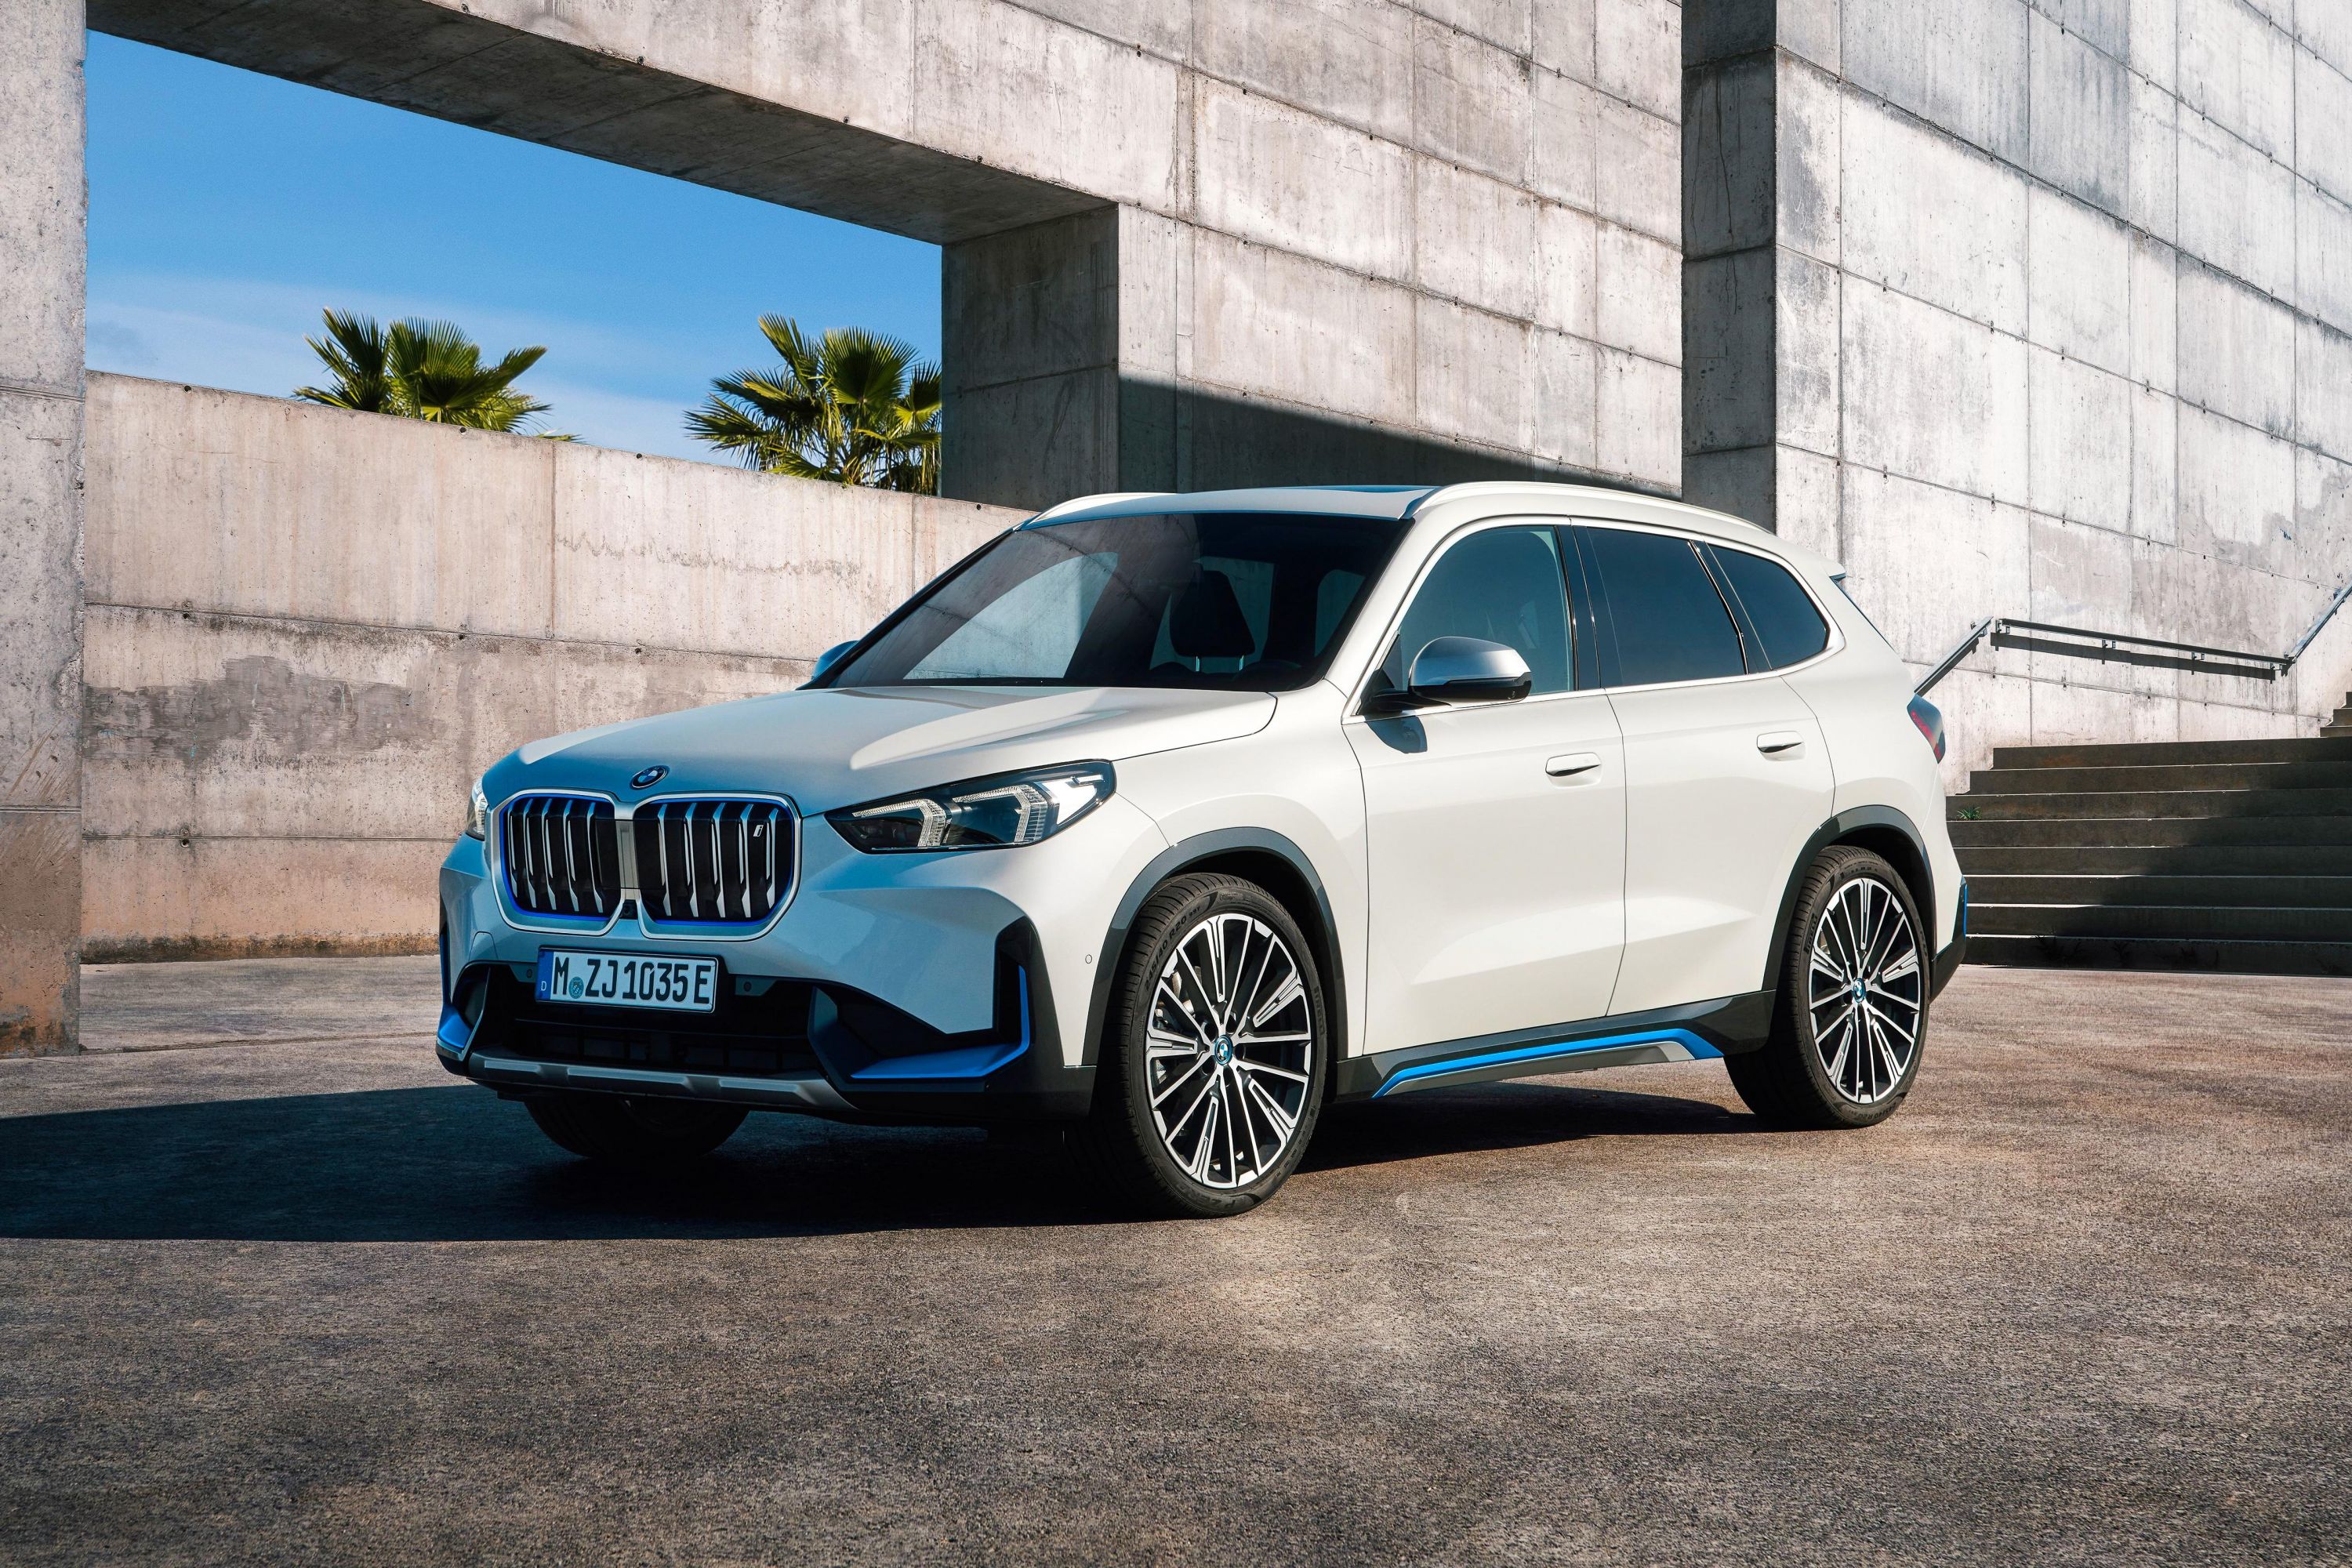 BMW X1 Price (February Offers), Images, colours, Reviews & Specs